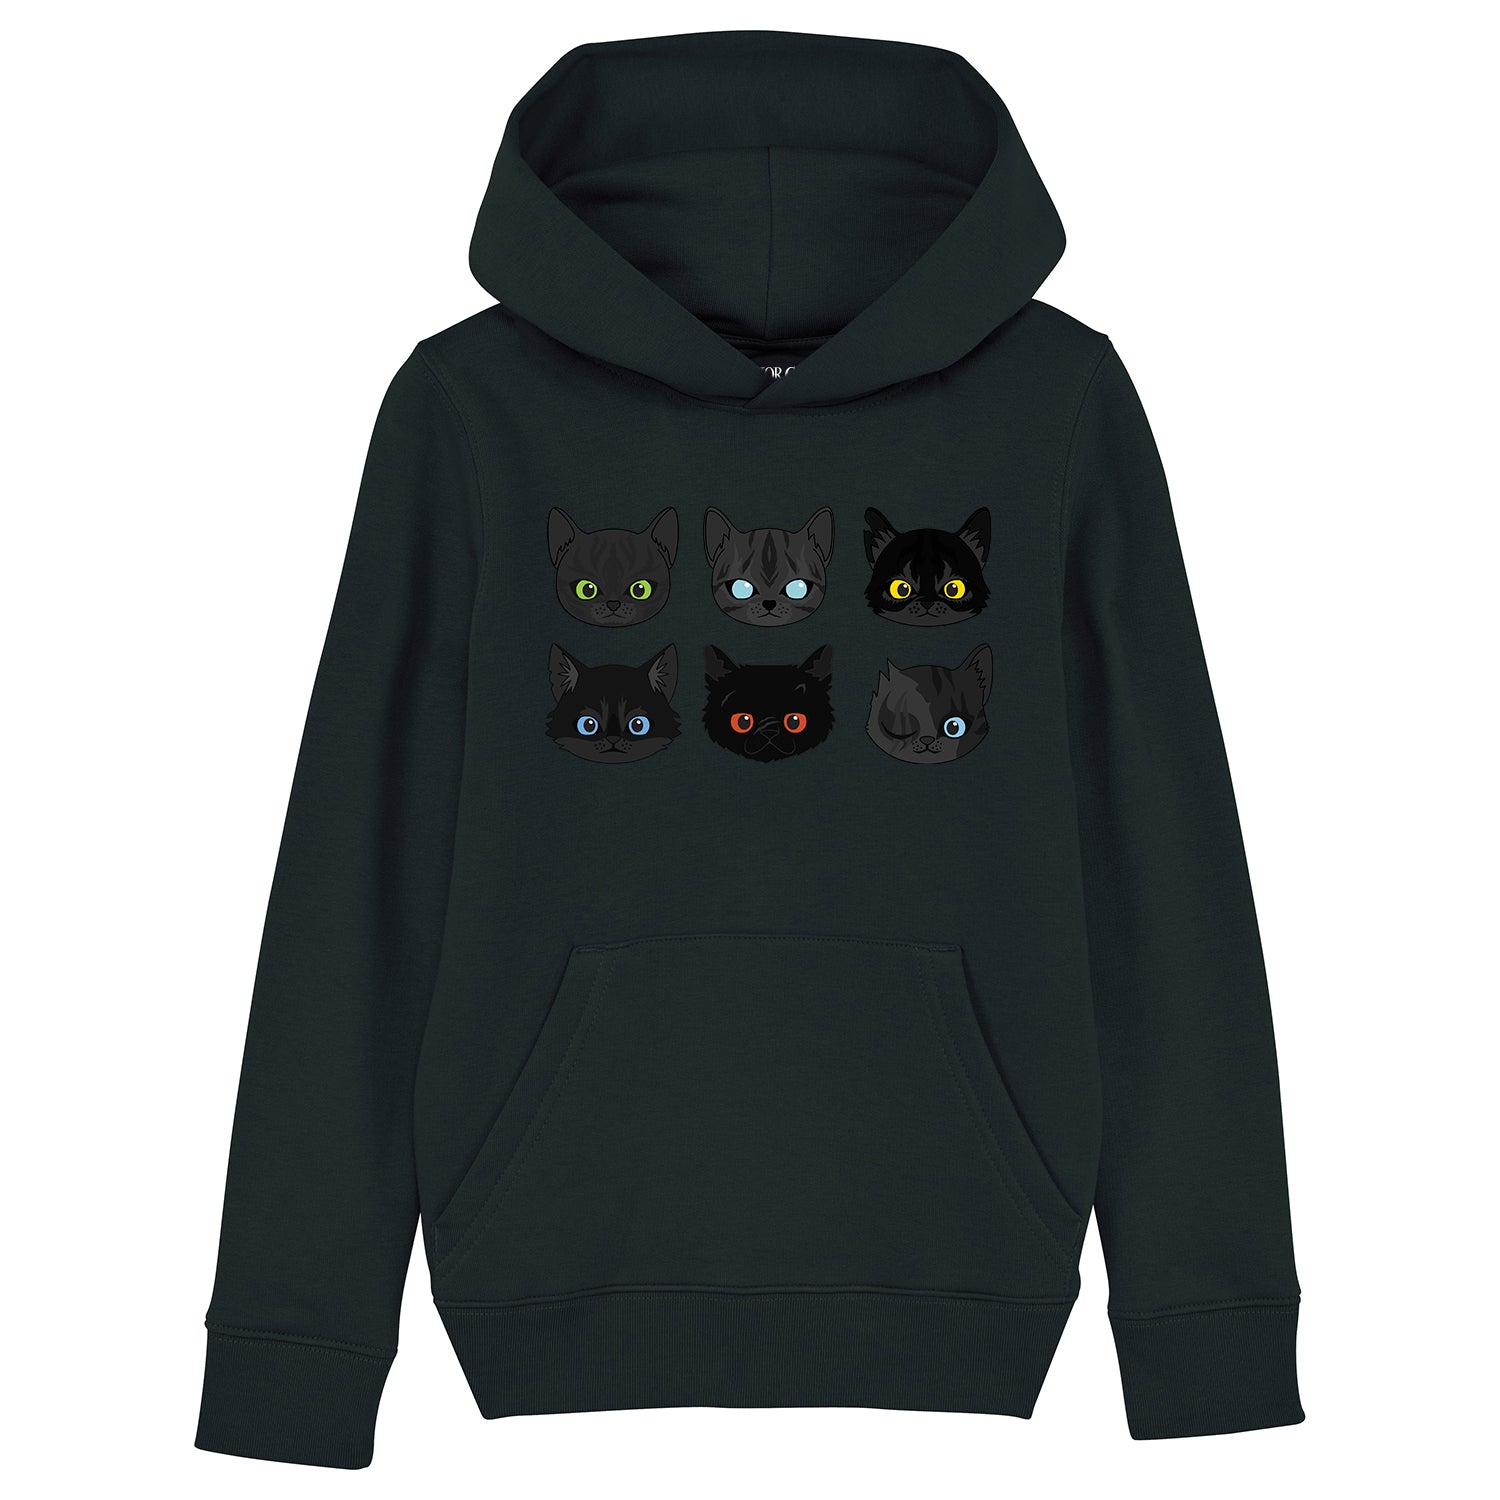 Warrior Cats - Four Cats Hoodie Unisex Adult 